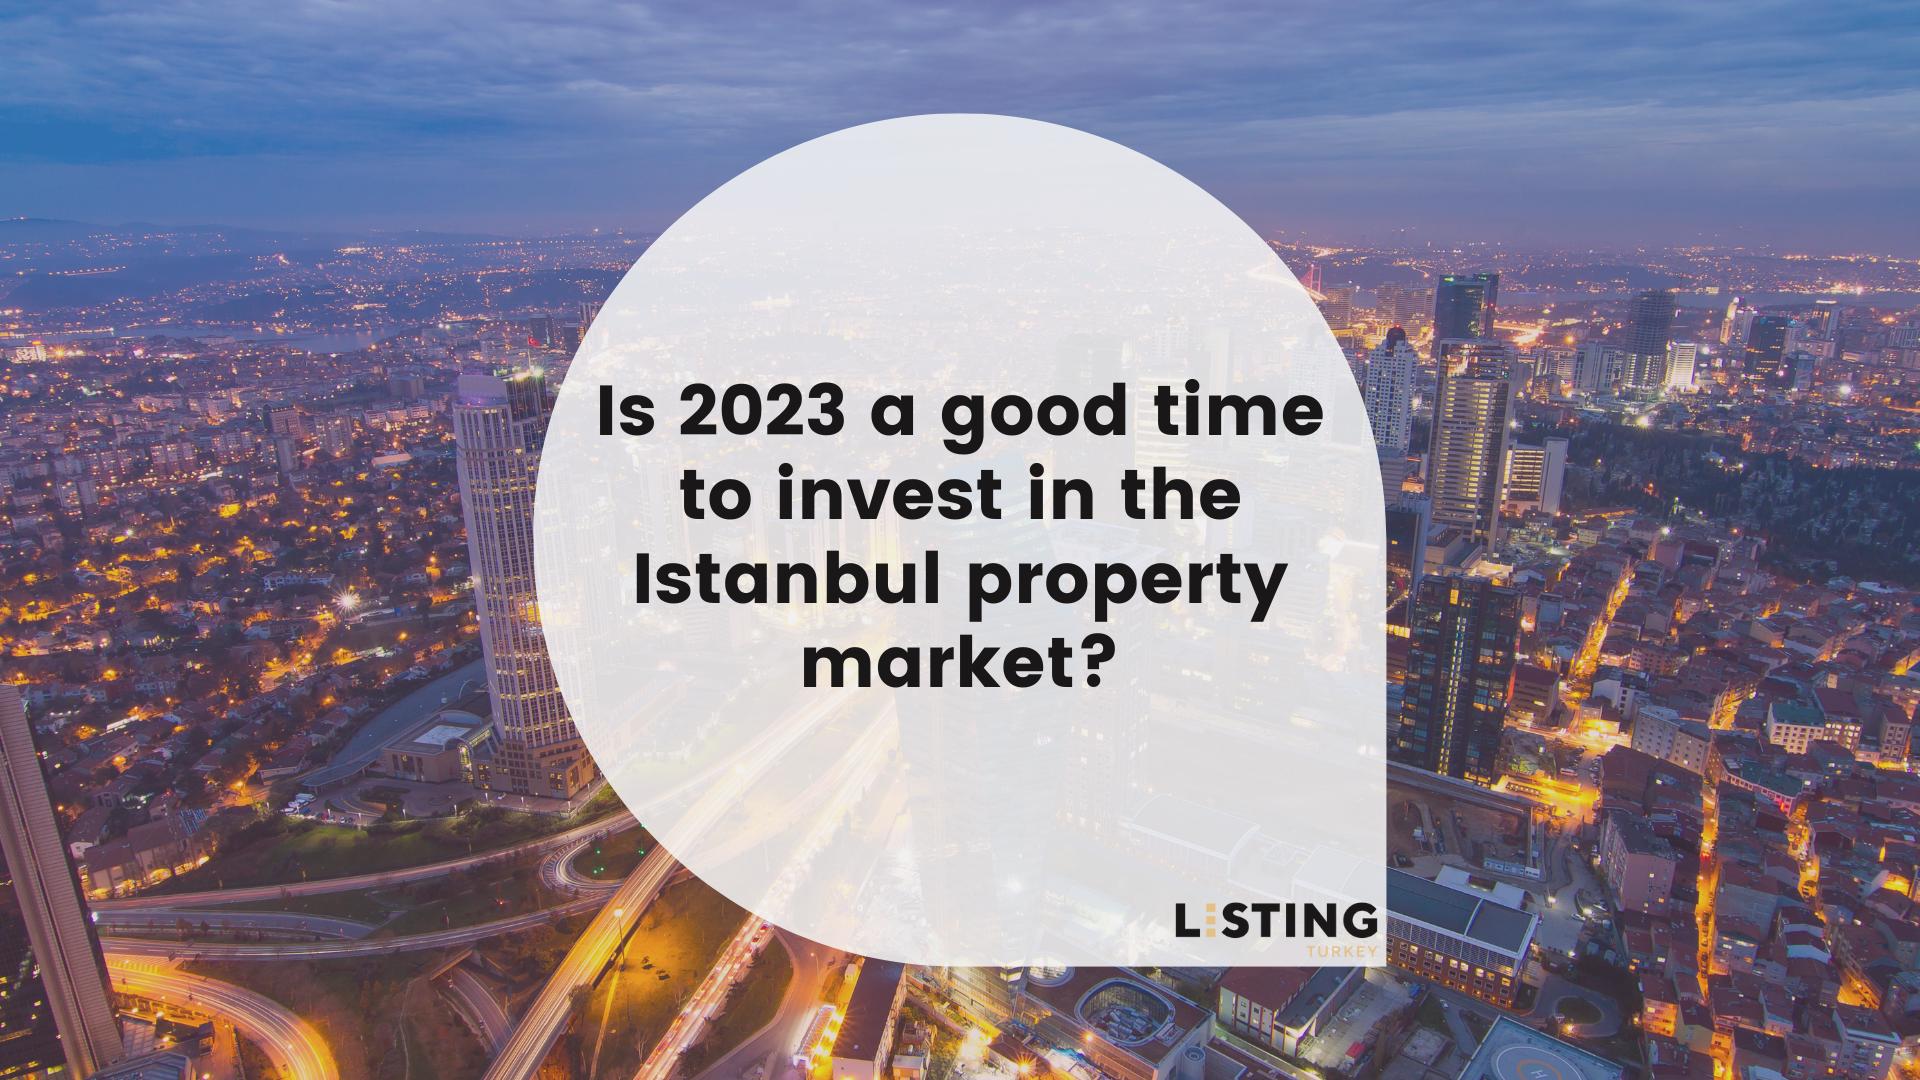 Is 2023 a good time to invest in the Istanbul property market